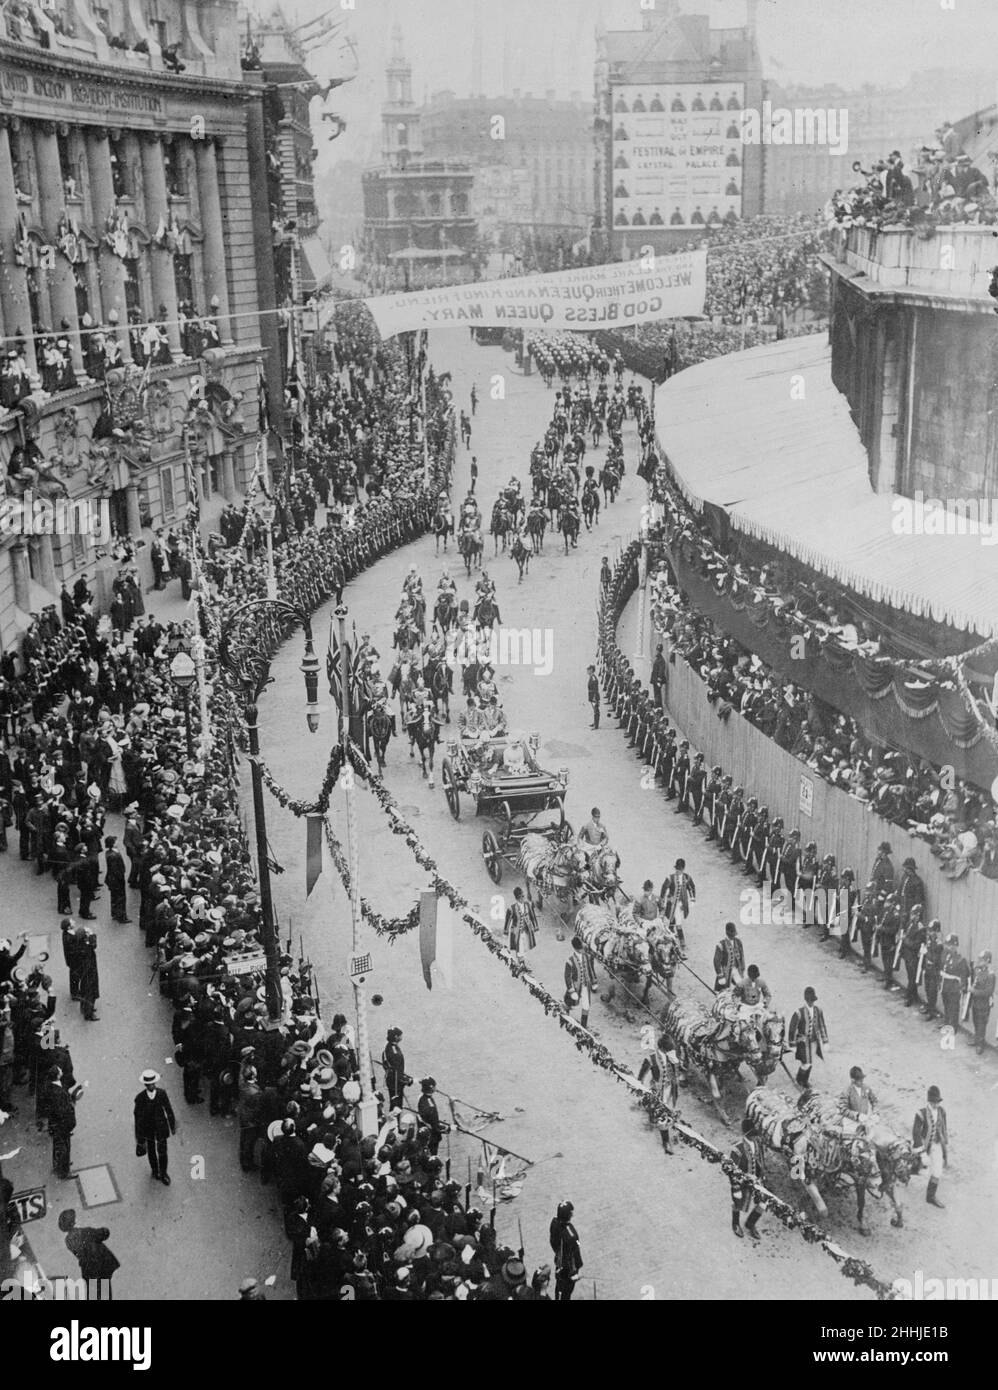 Coronation of King George V. Thousands of people cheer from the side of the road as the procession makes its way along a London street. 22nd June 1911. Stock Photo